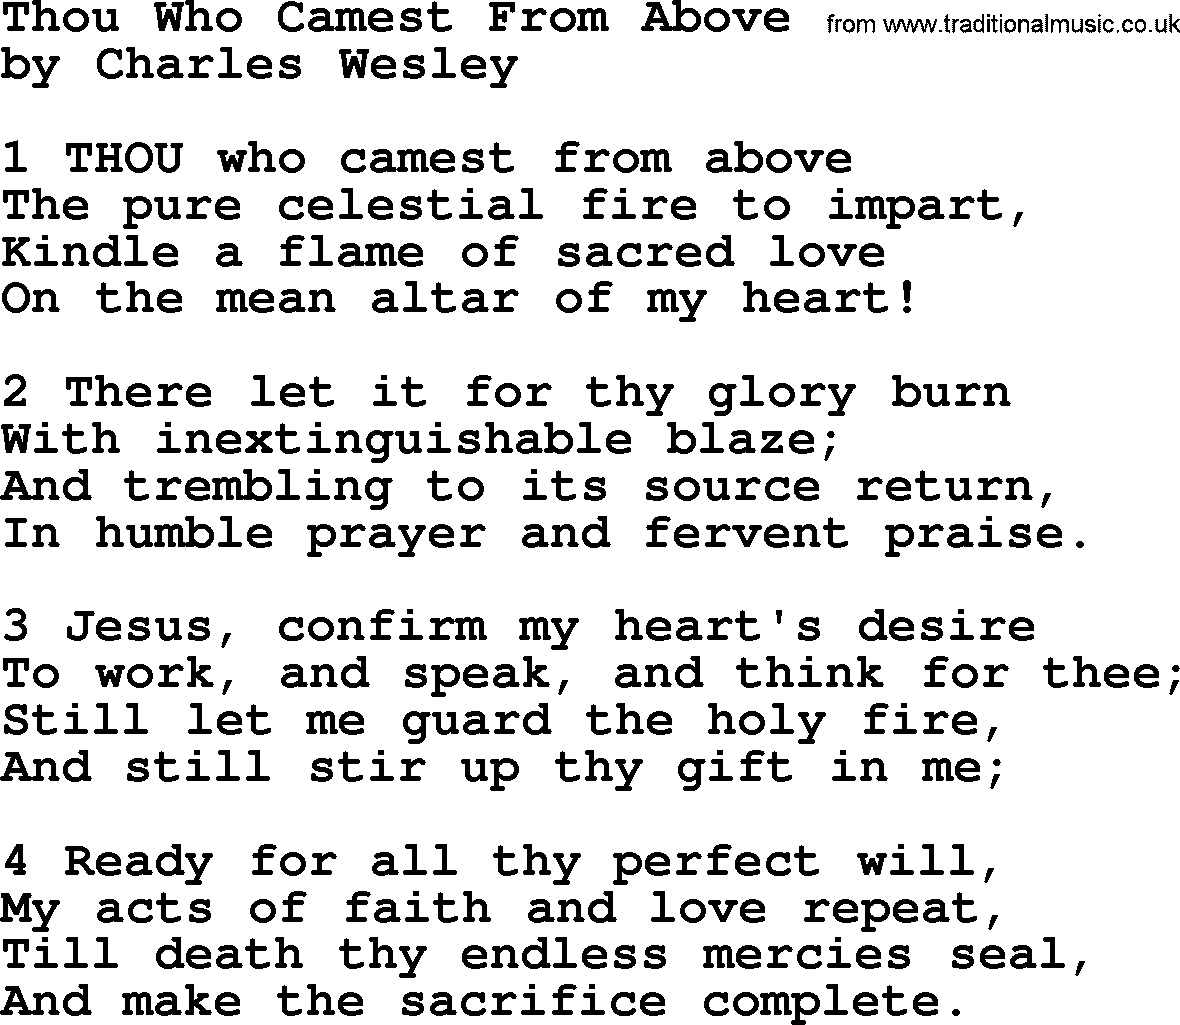 Charles Wesley hymn: Thou Who Camest From Above, lyrics